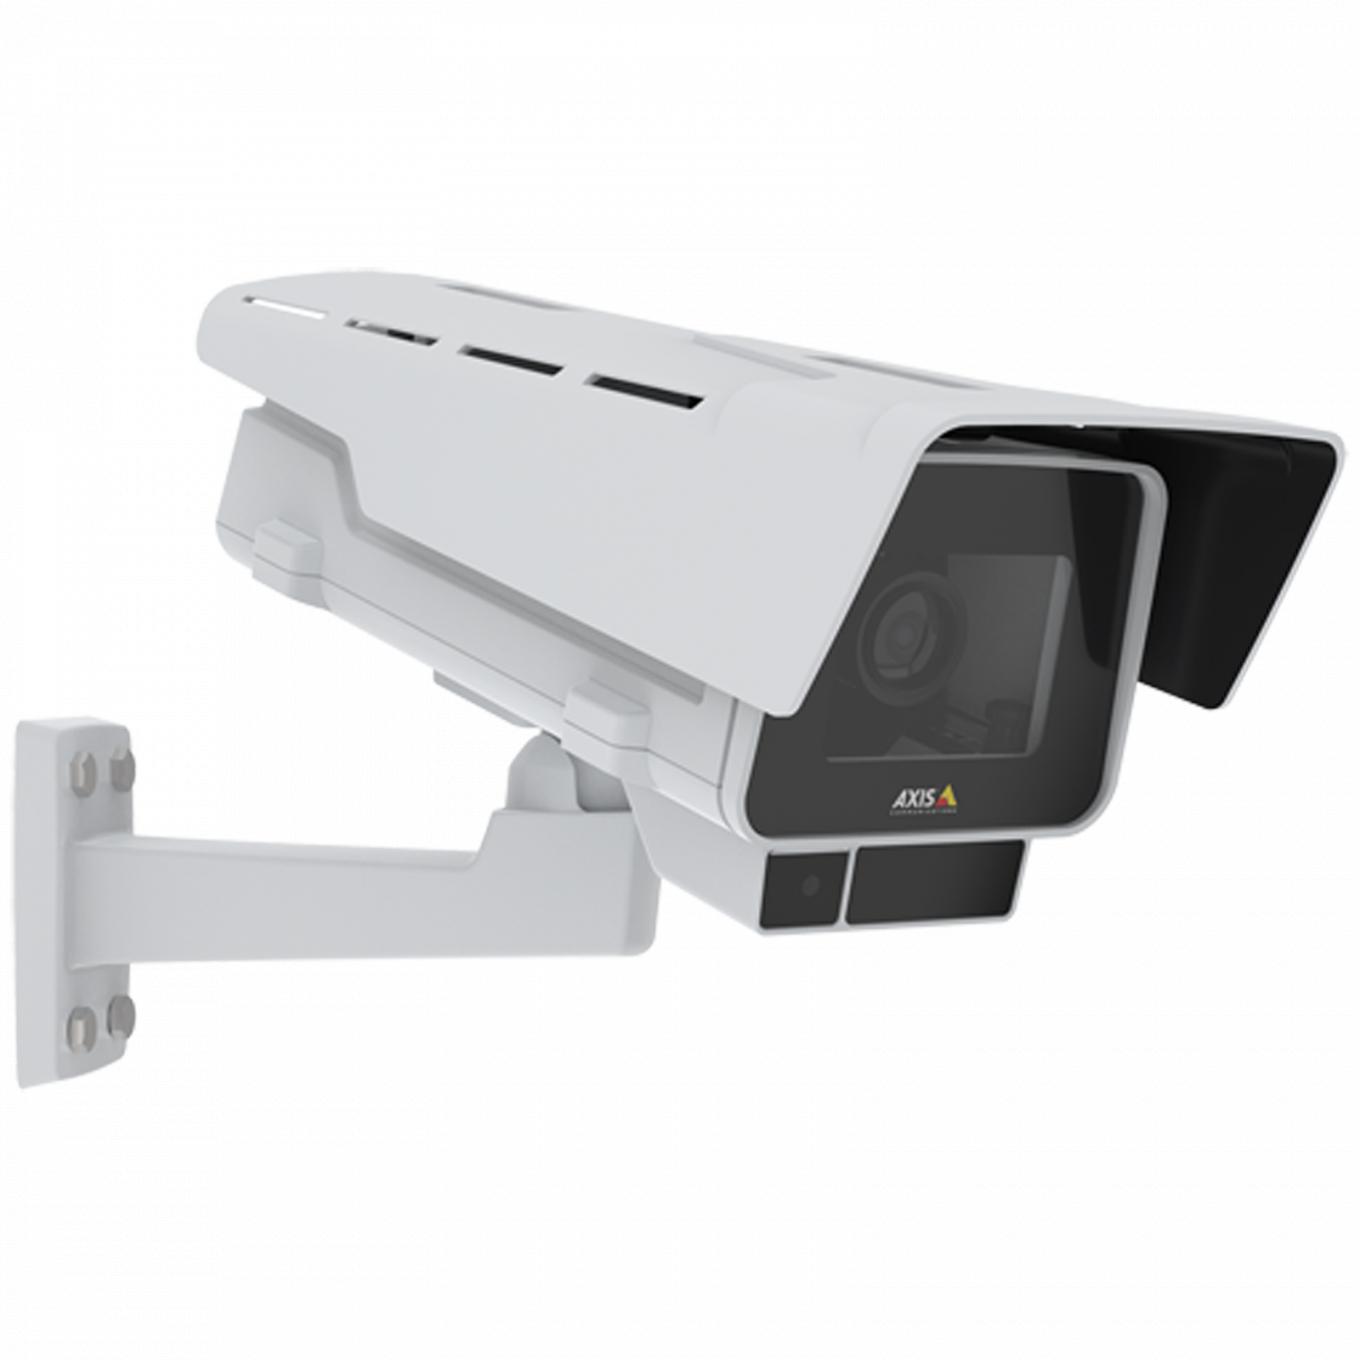 AXIS P1378-LE IP Camera has Electronic image stabilization and OptimizedIR. The product is viewed from its right angle.